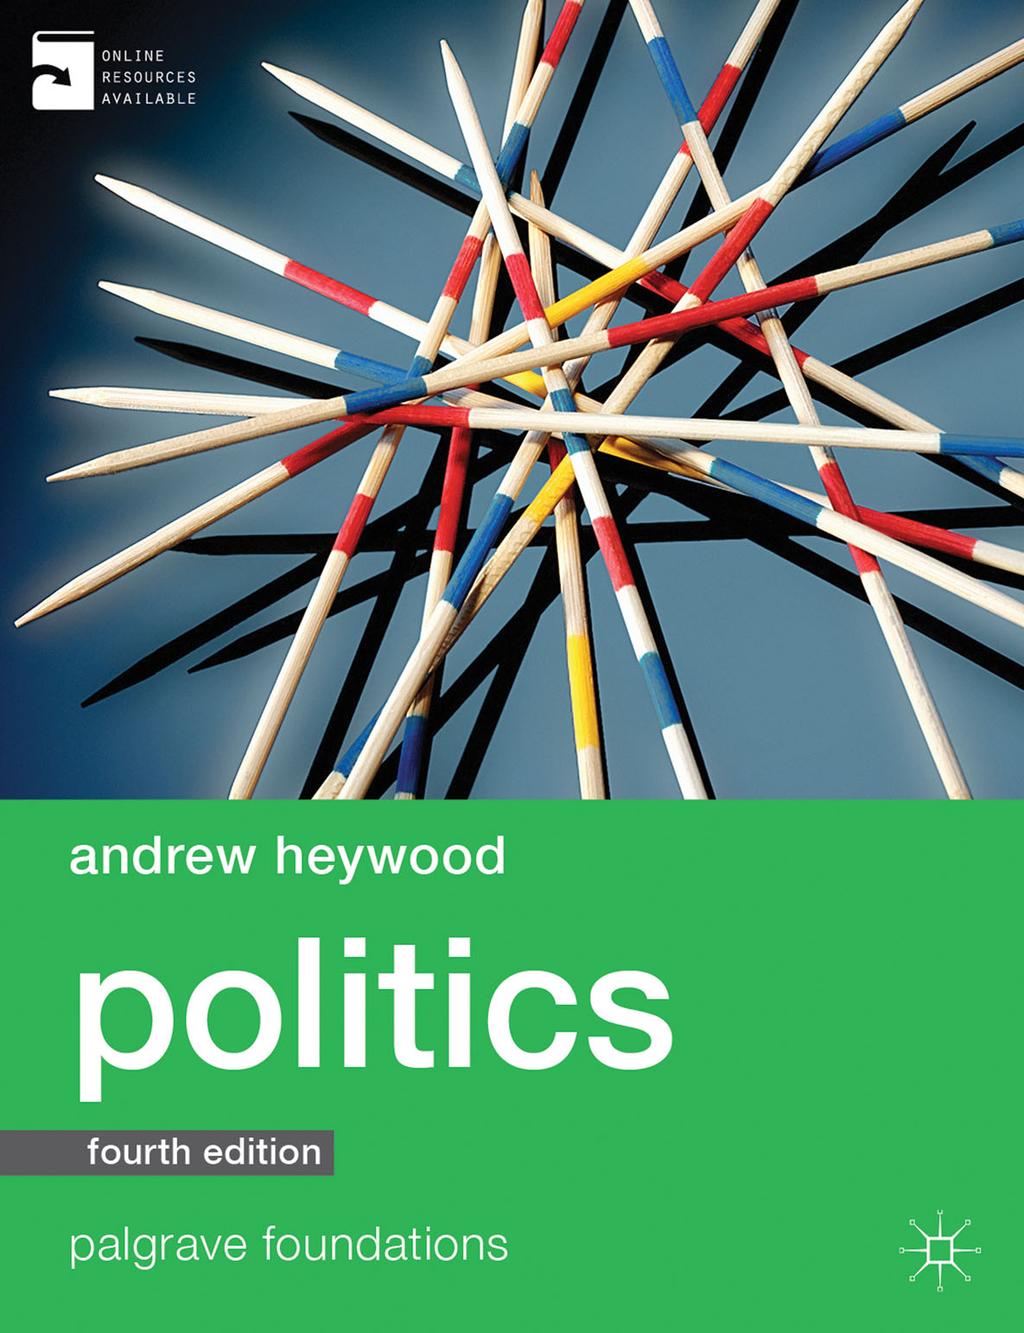 POLS 321 is part of the New Zealand Politics stream of study within the Department of Politics. It builds on much of the focus in POLS 102 NZ Politics Introduction.